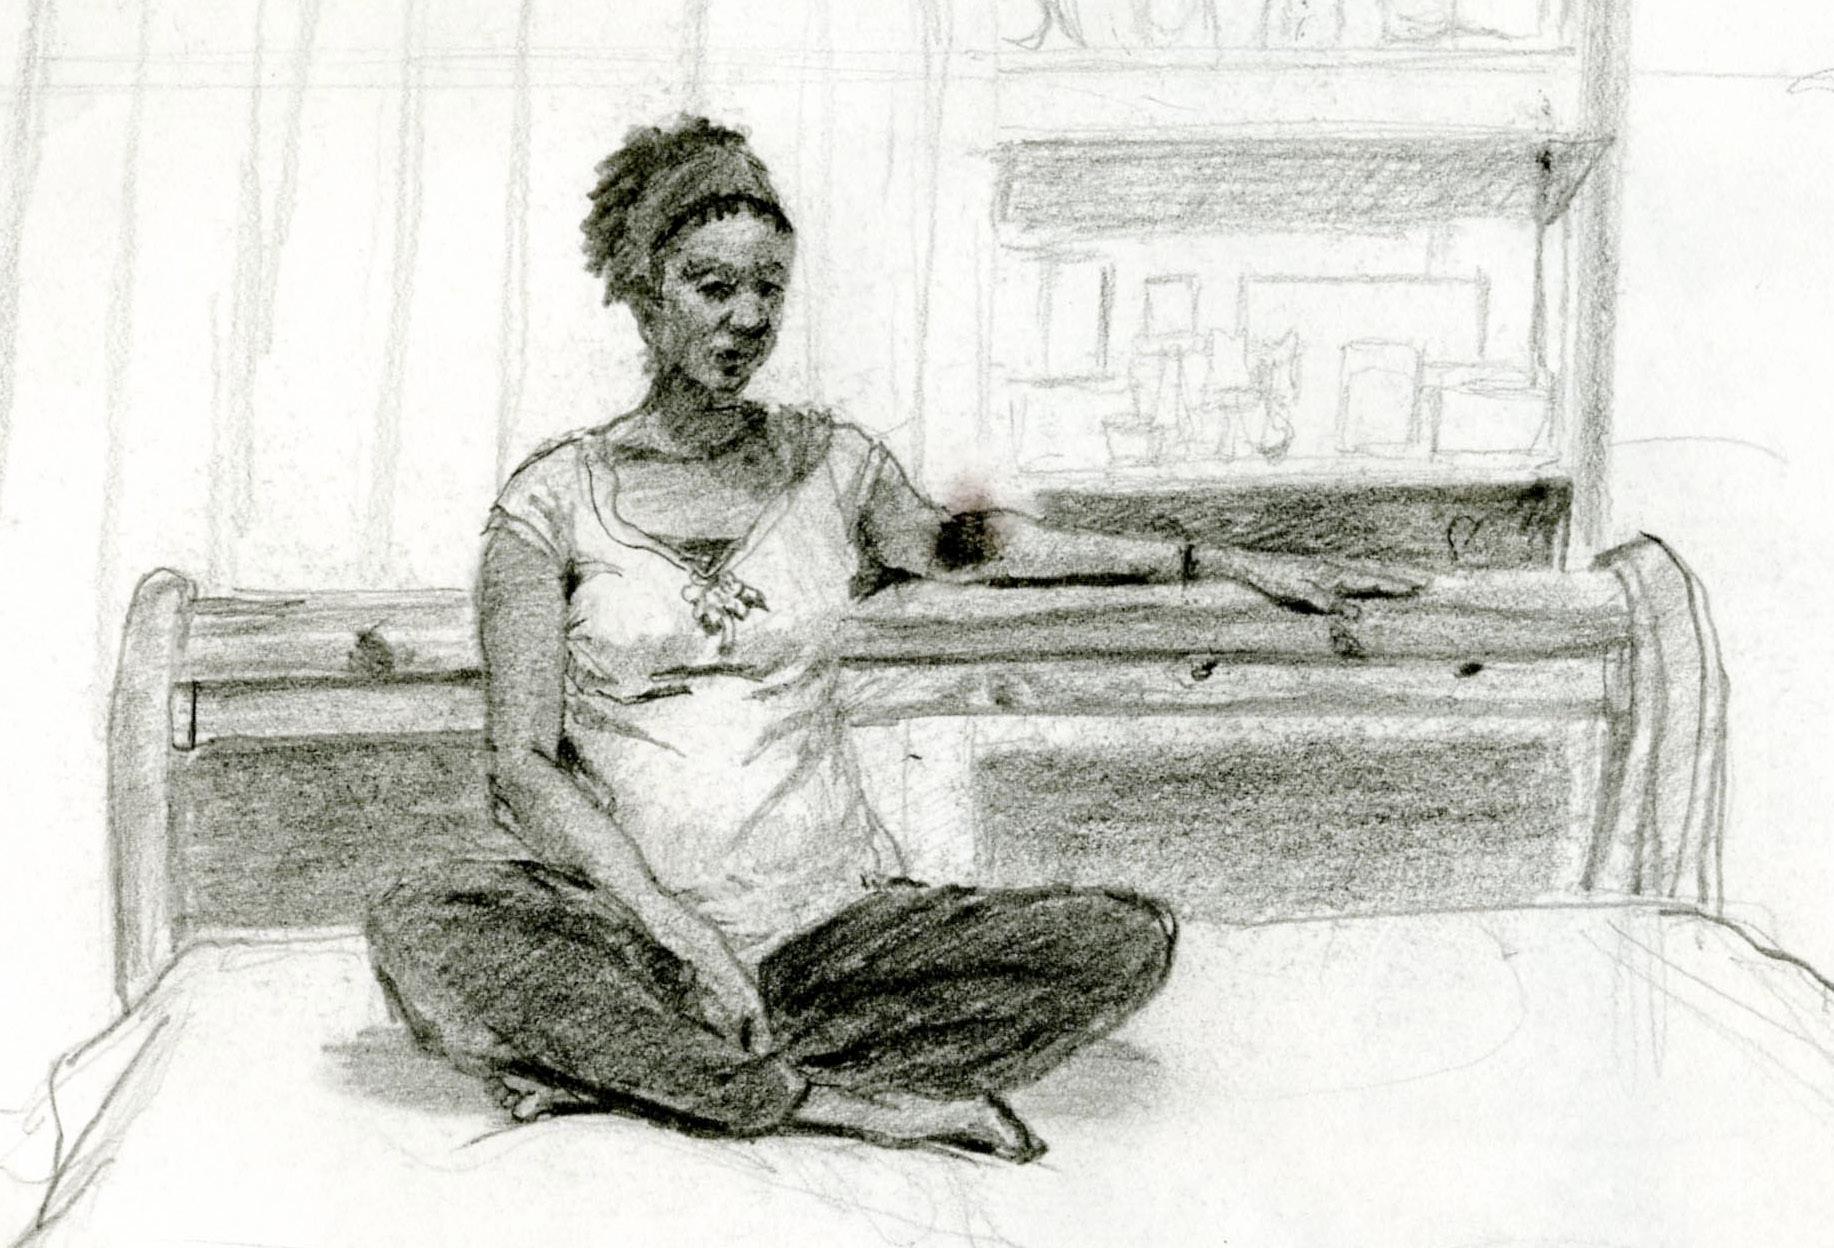 Untitled (Letitia, pregnant with Rising Sun)
Graphite on paper, 2005
Signed: 